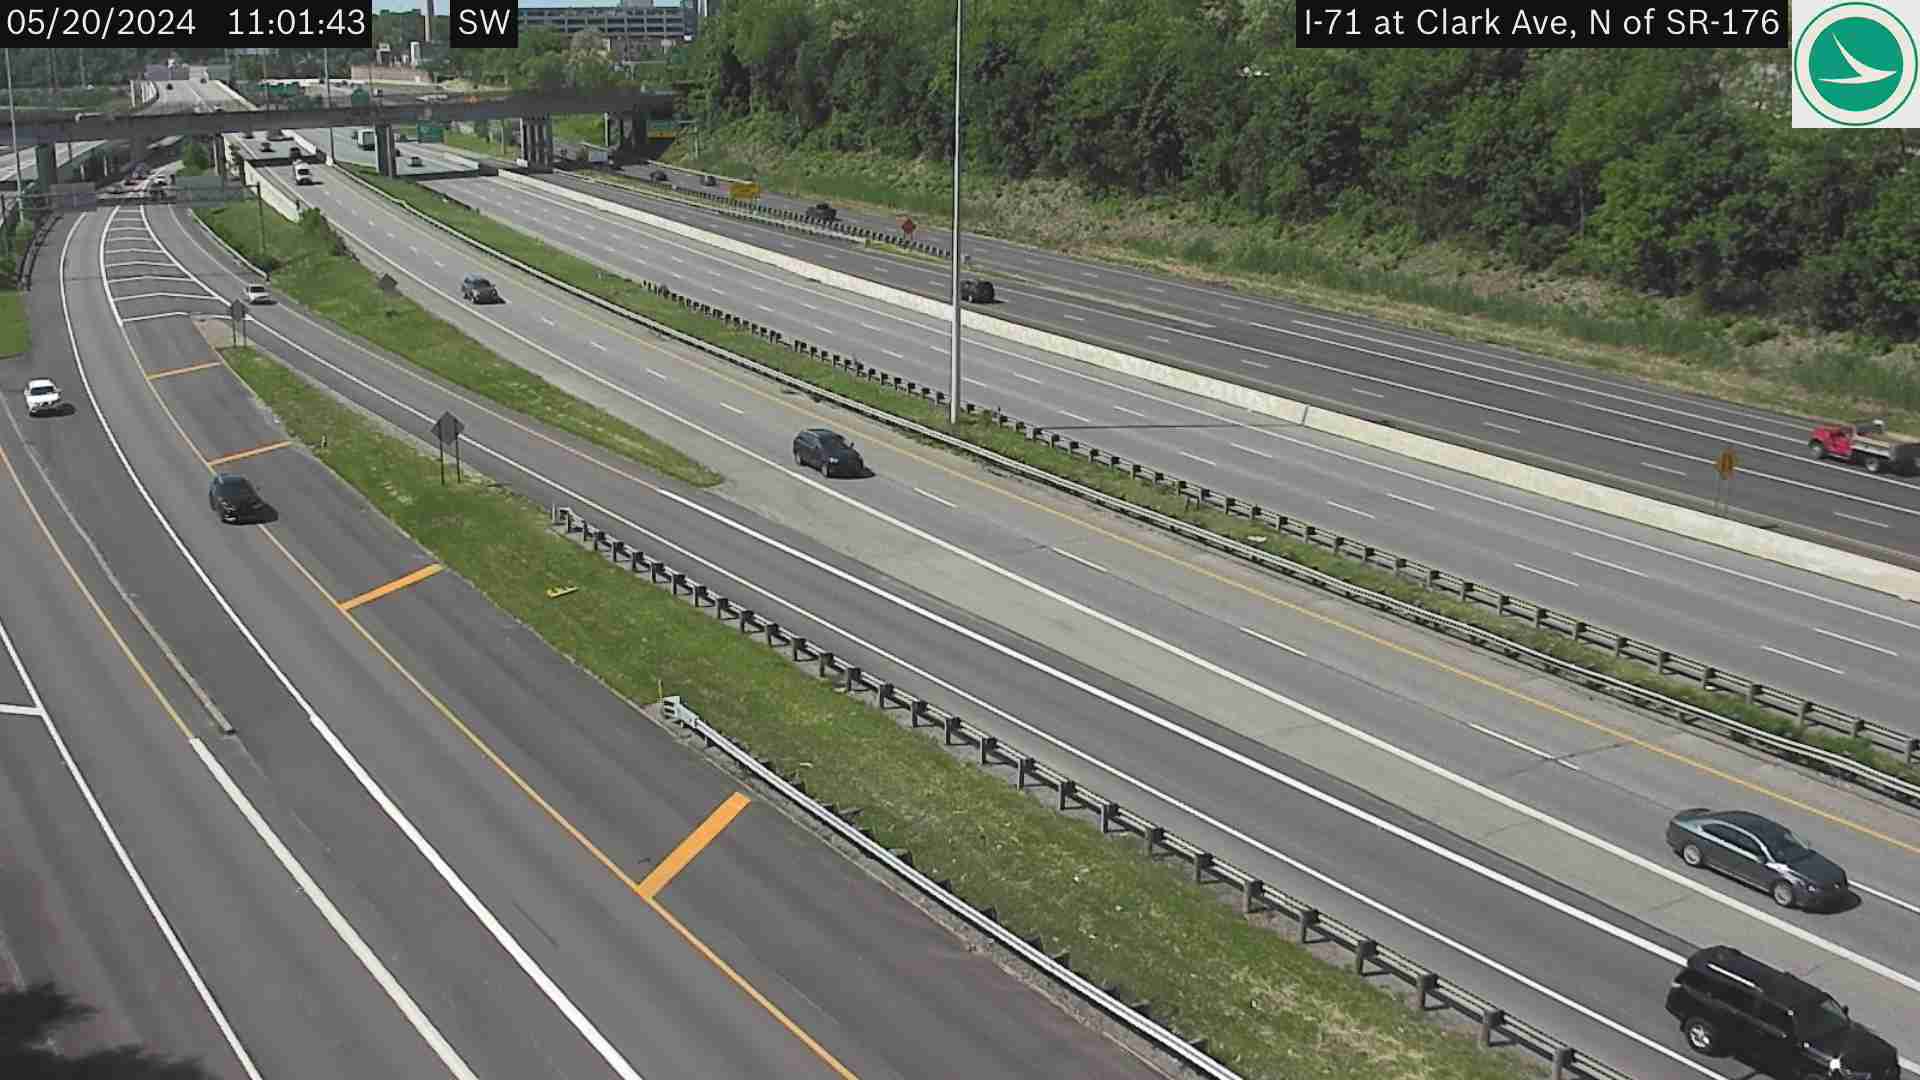 Traffic Cam I-71 at Clark Ave, N of SR-176 Player